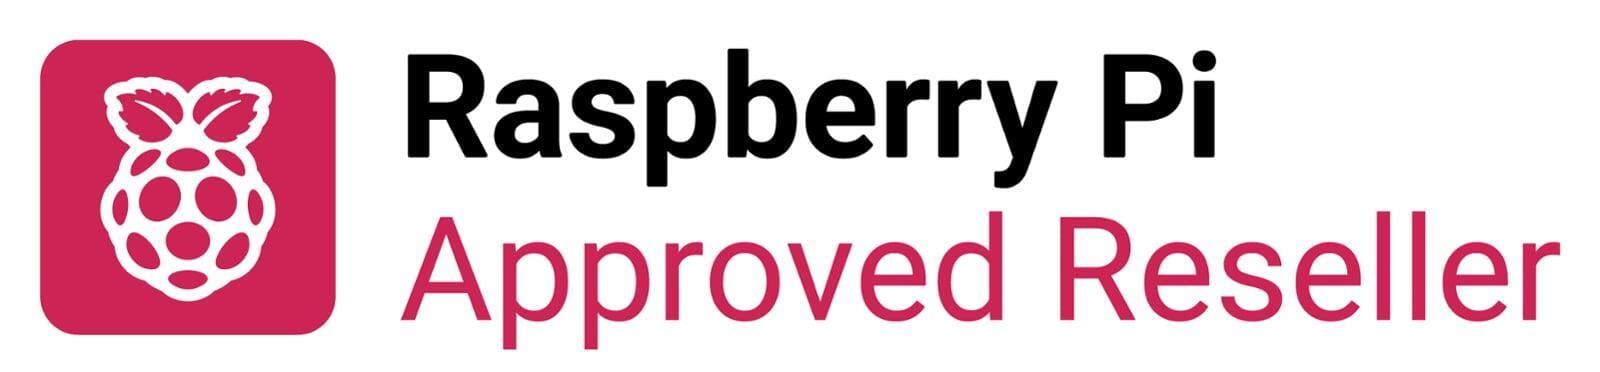 Approved Reseller for Raspberry Pi